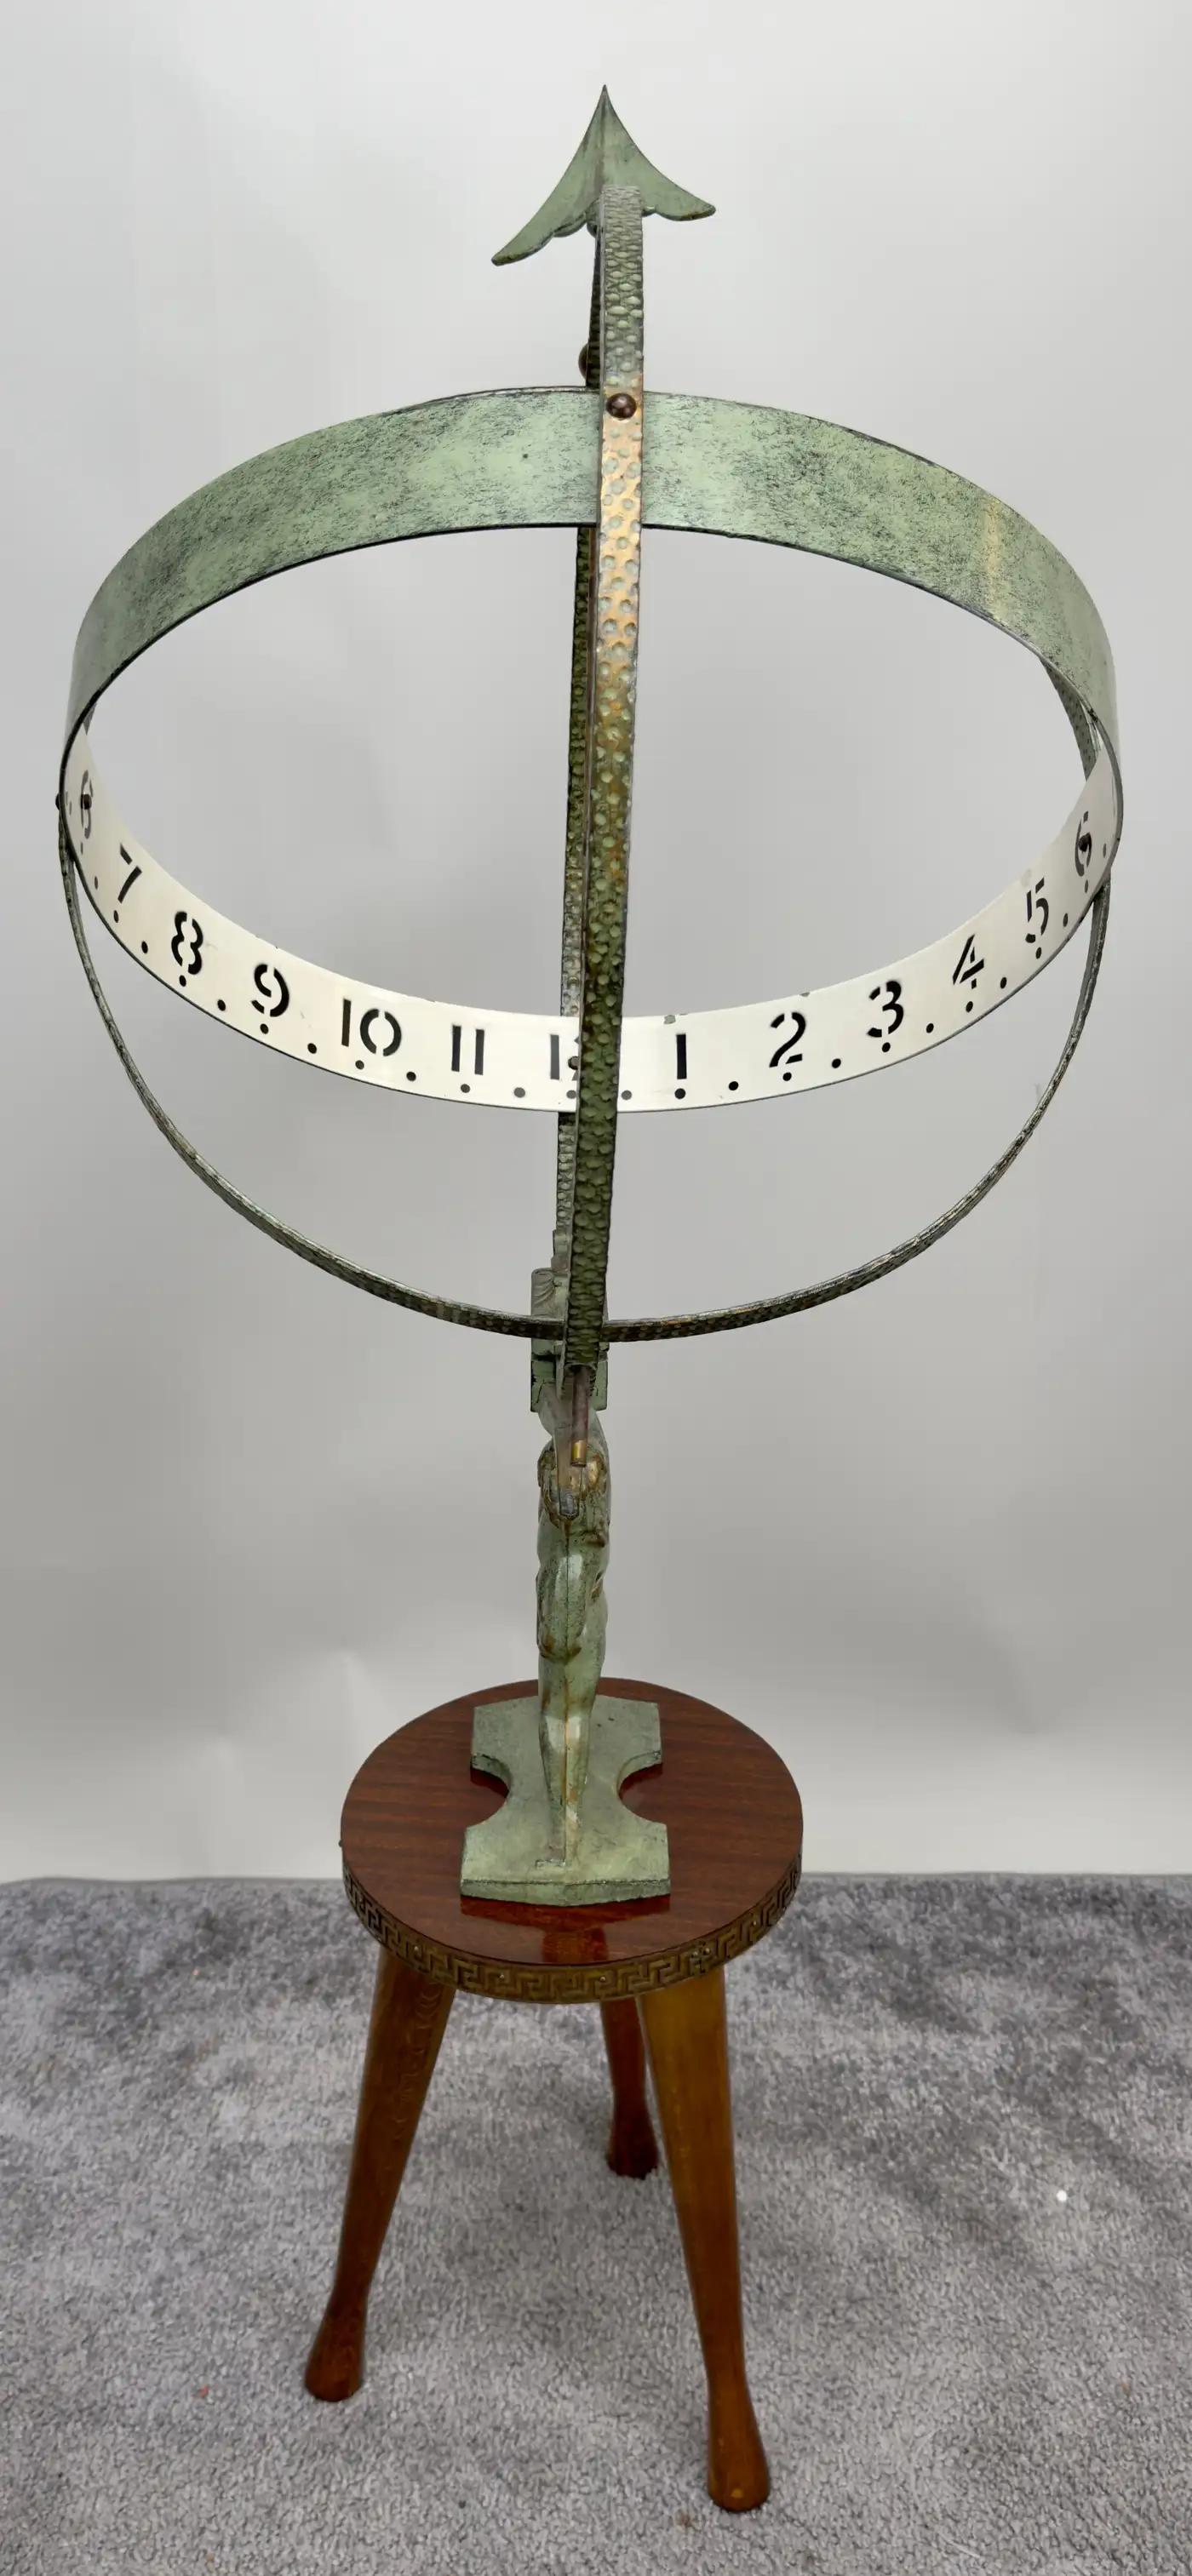 Vintage Swedish Sun Clock or Armillary Sun Dial Attributed to Sune Rooth For Sale 8